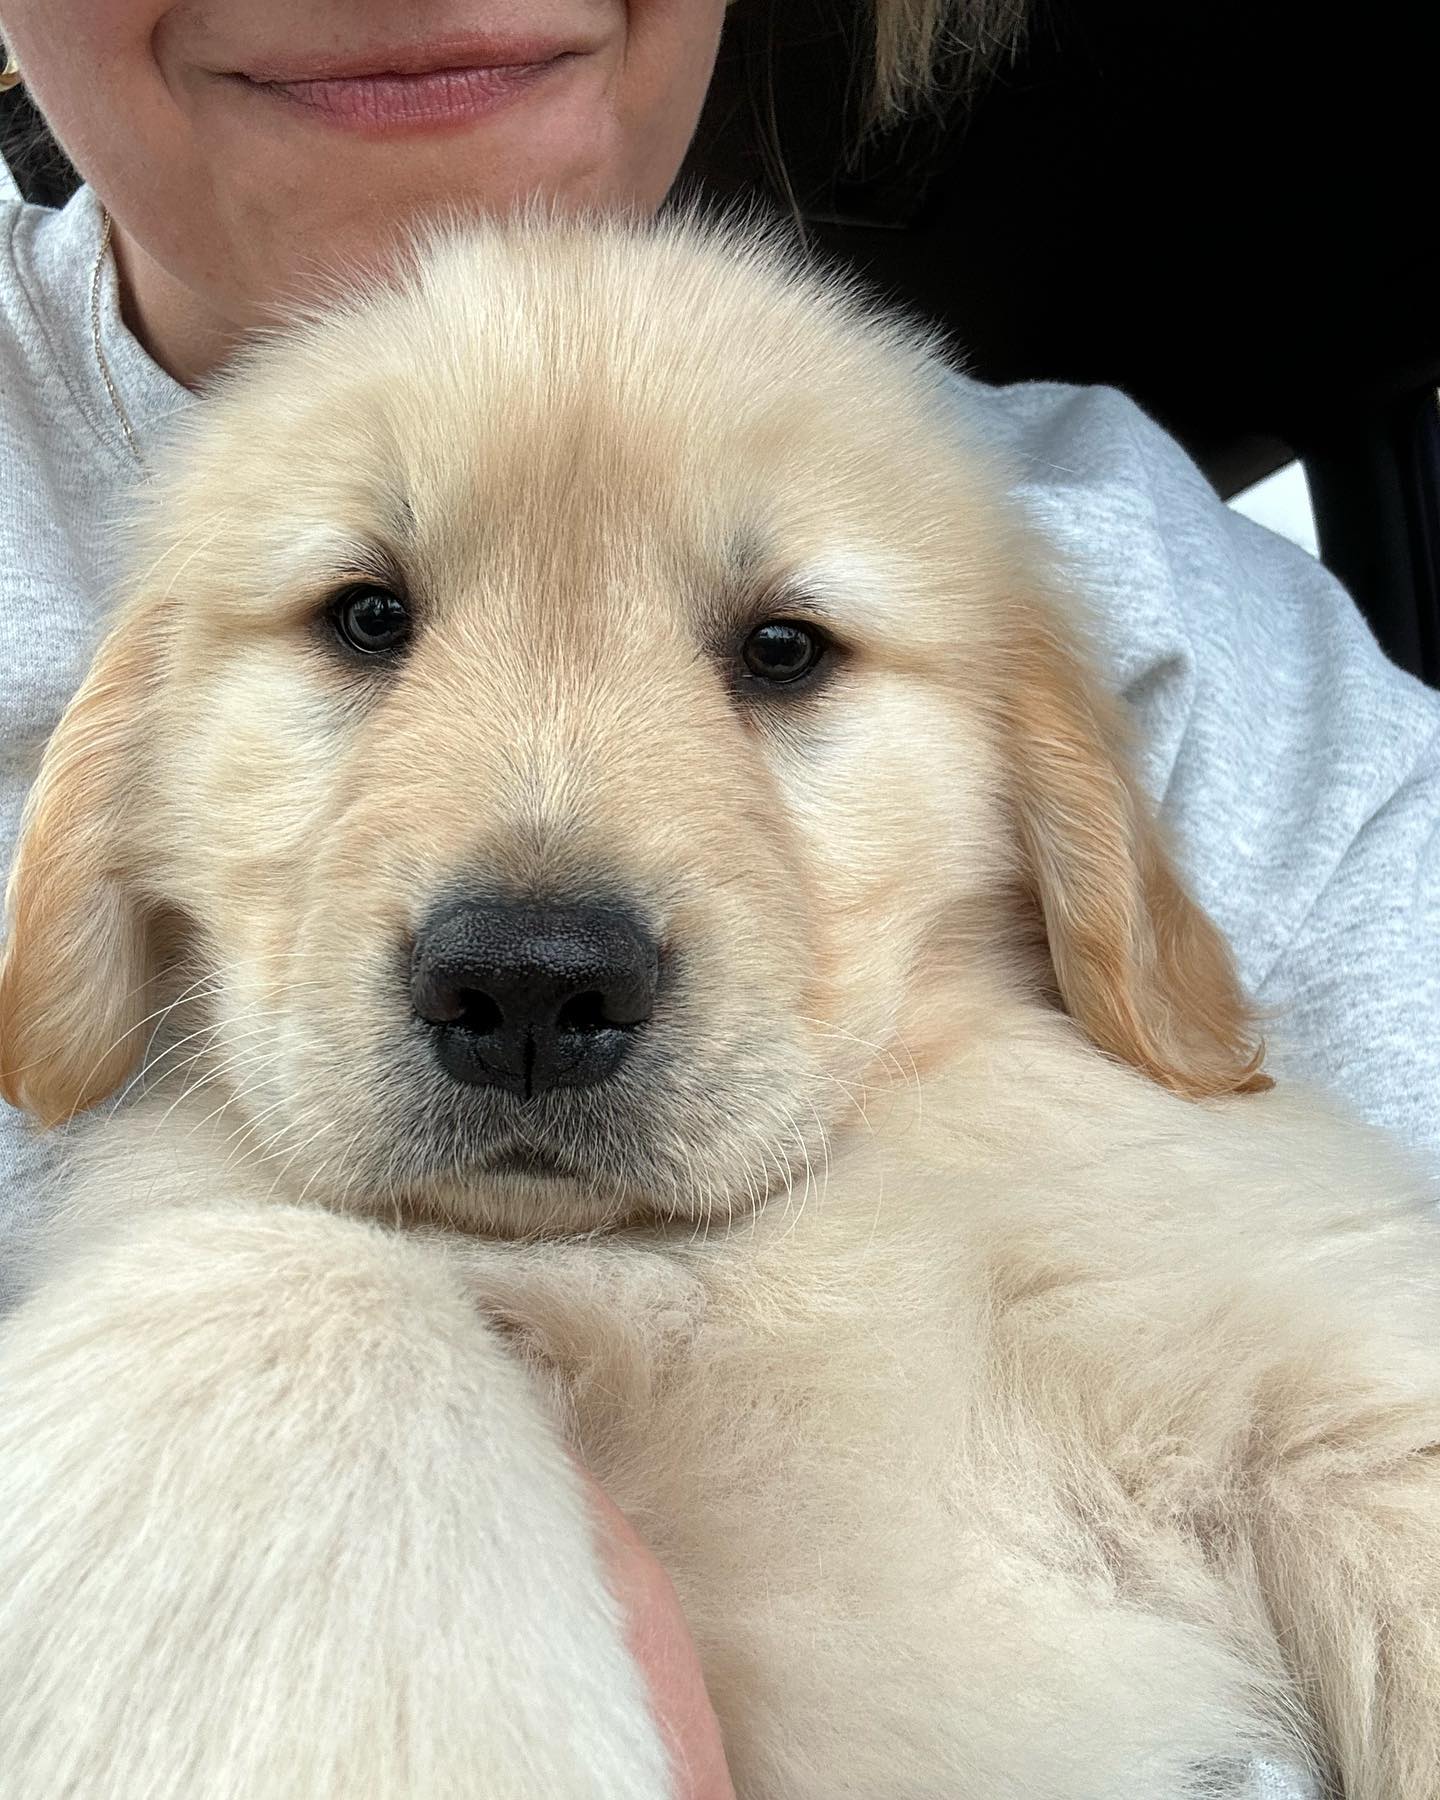 Golden retriever puppy looking confused at the camera.